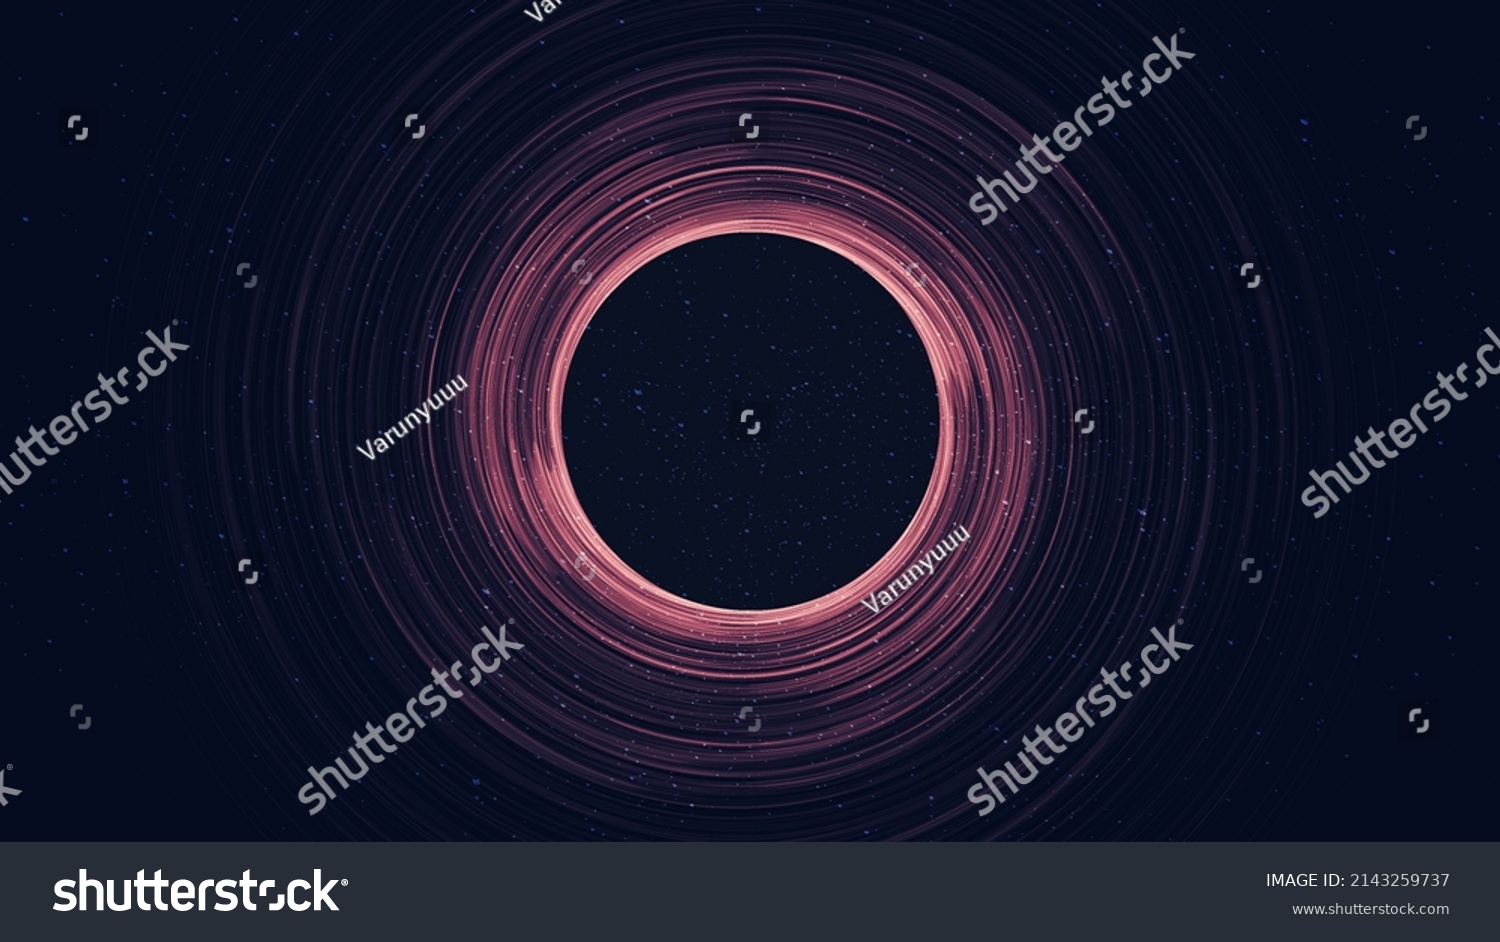 Dark Violet Spiral Black hole on Galaxy background with Milky Way spiral,Universe and starry concept design,vector #2143259737